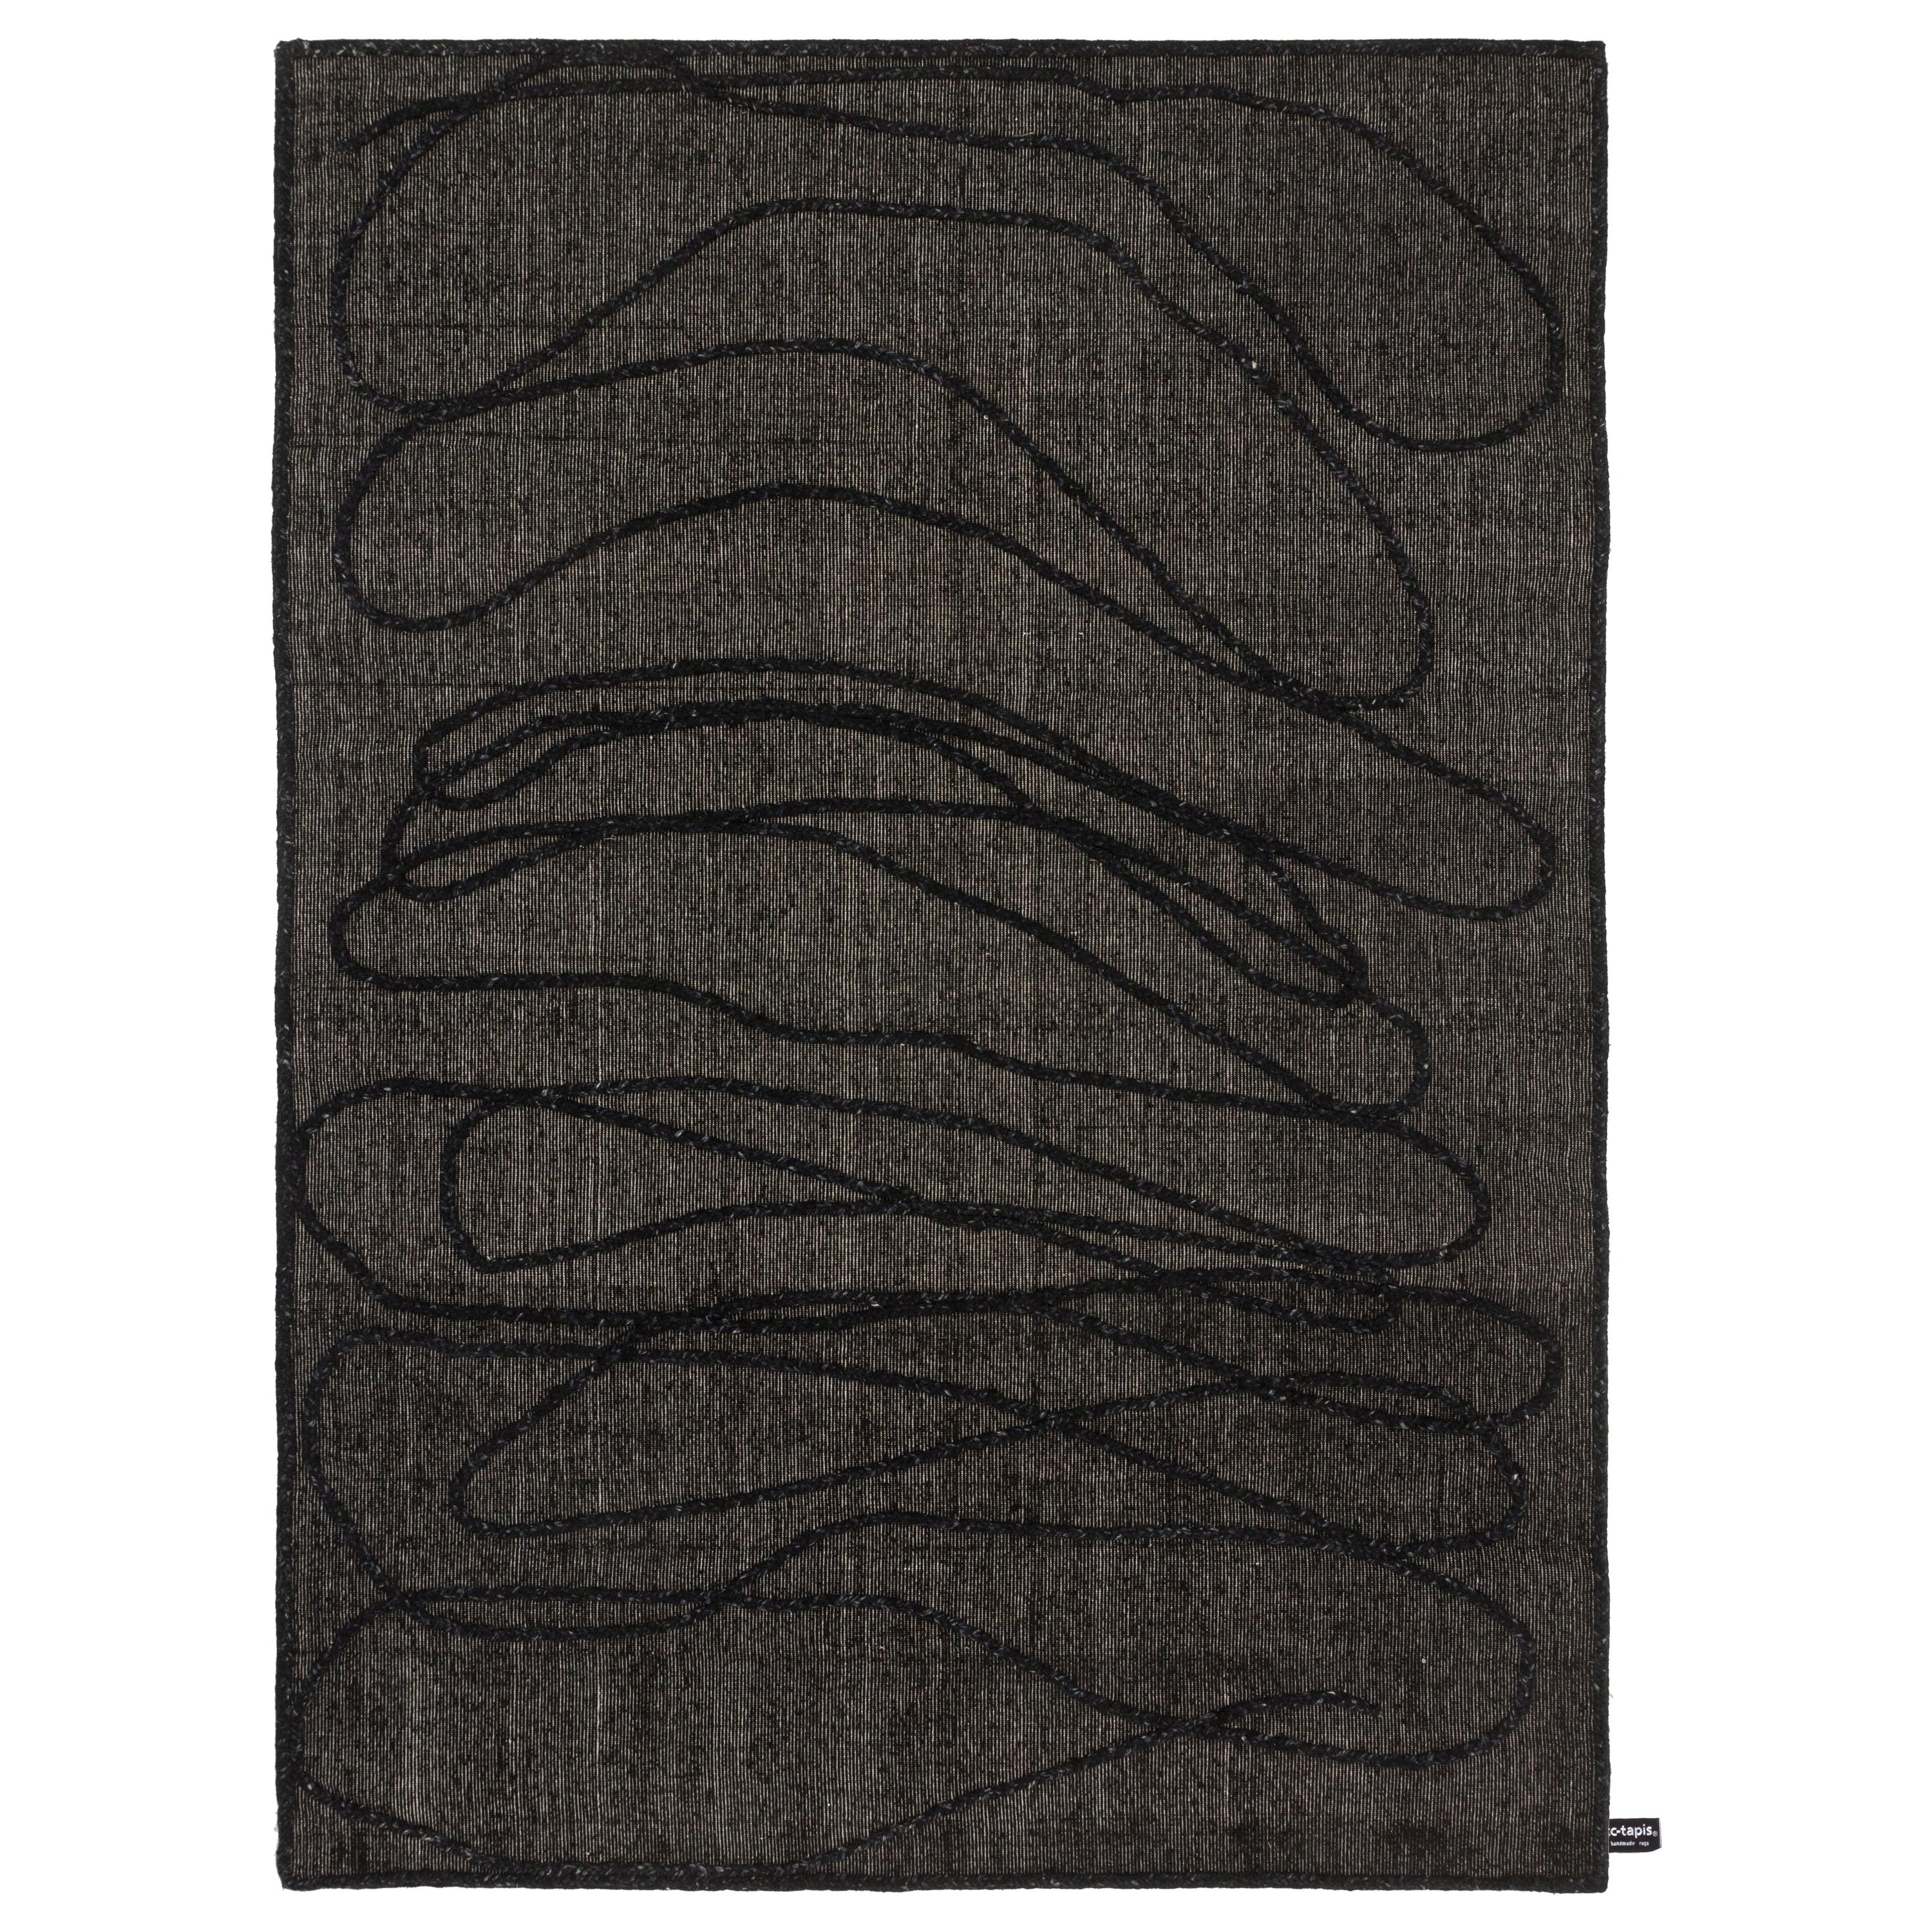 cc-tapis Inventory Rope Rug by Faye Toogood